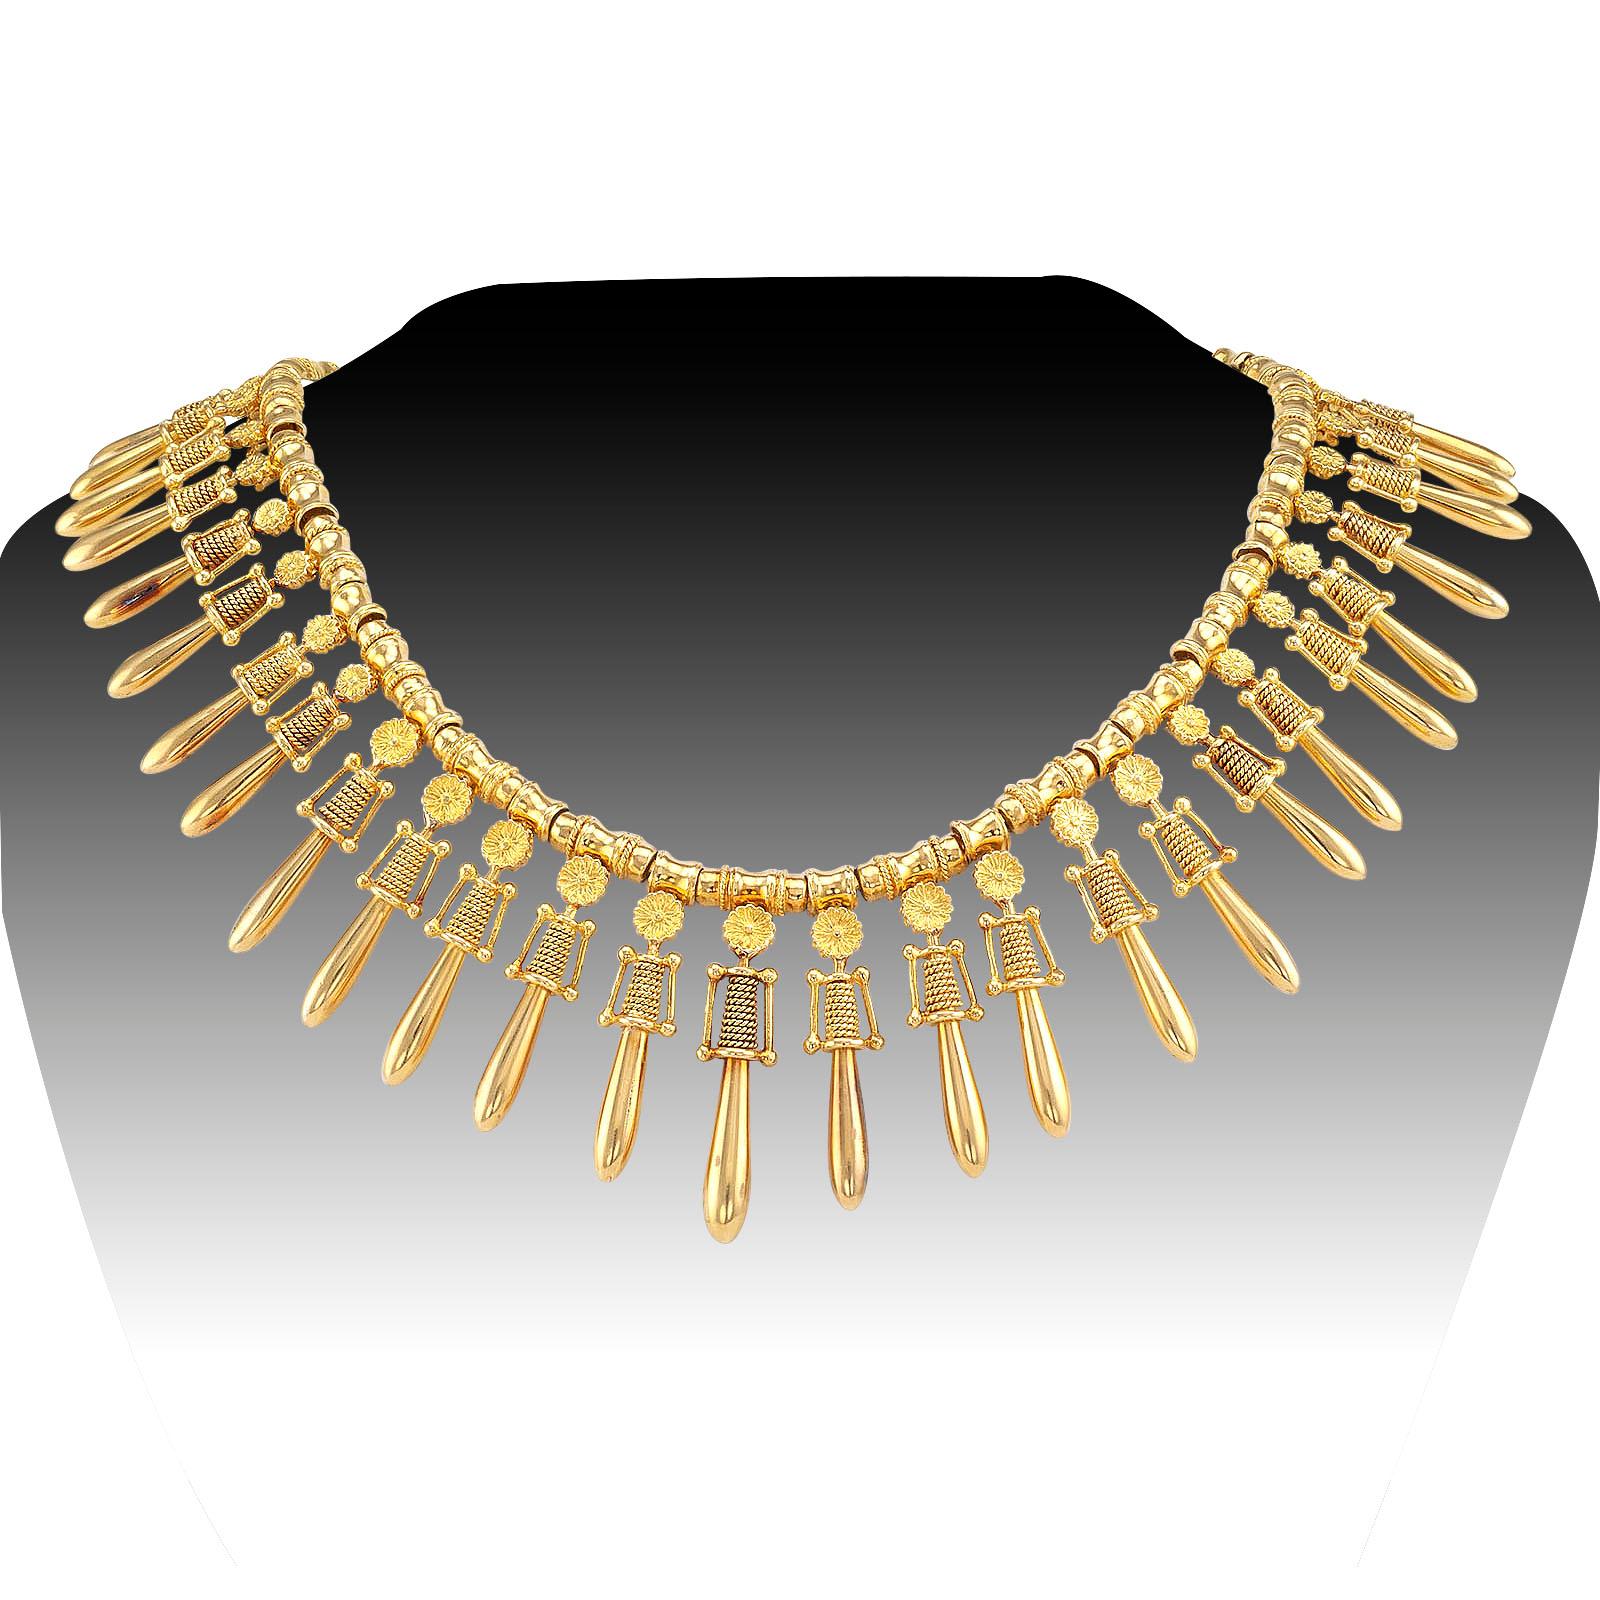 Lalaounis archaeological revival style yellow gold fringe necklace circa 1970.

DETAILS:

METAL: 18-karat yellow gold.
MEASUREMENTS: slightly graduated from 1-5/8” (4.1 cm) to 1-1/8” (2.9 cm), and 15” (38.1 cm) long overall, 125 grams.
SIGNED: